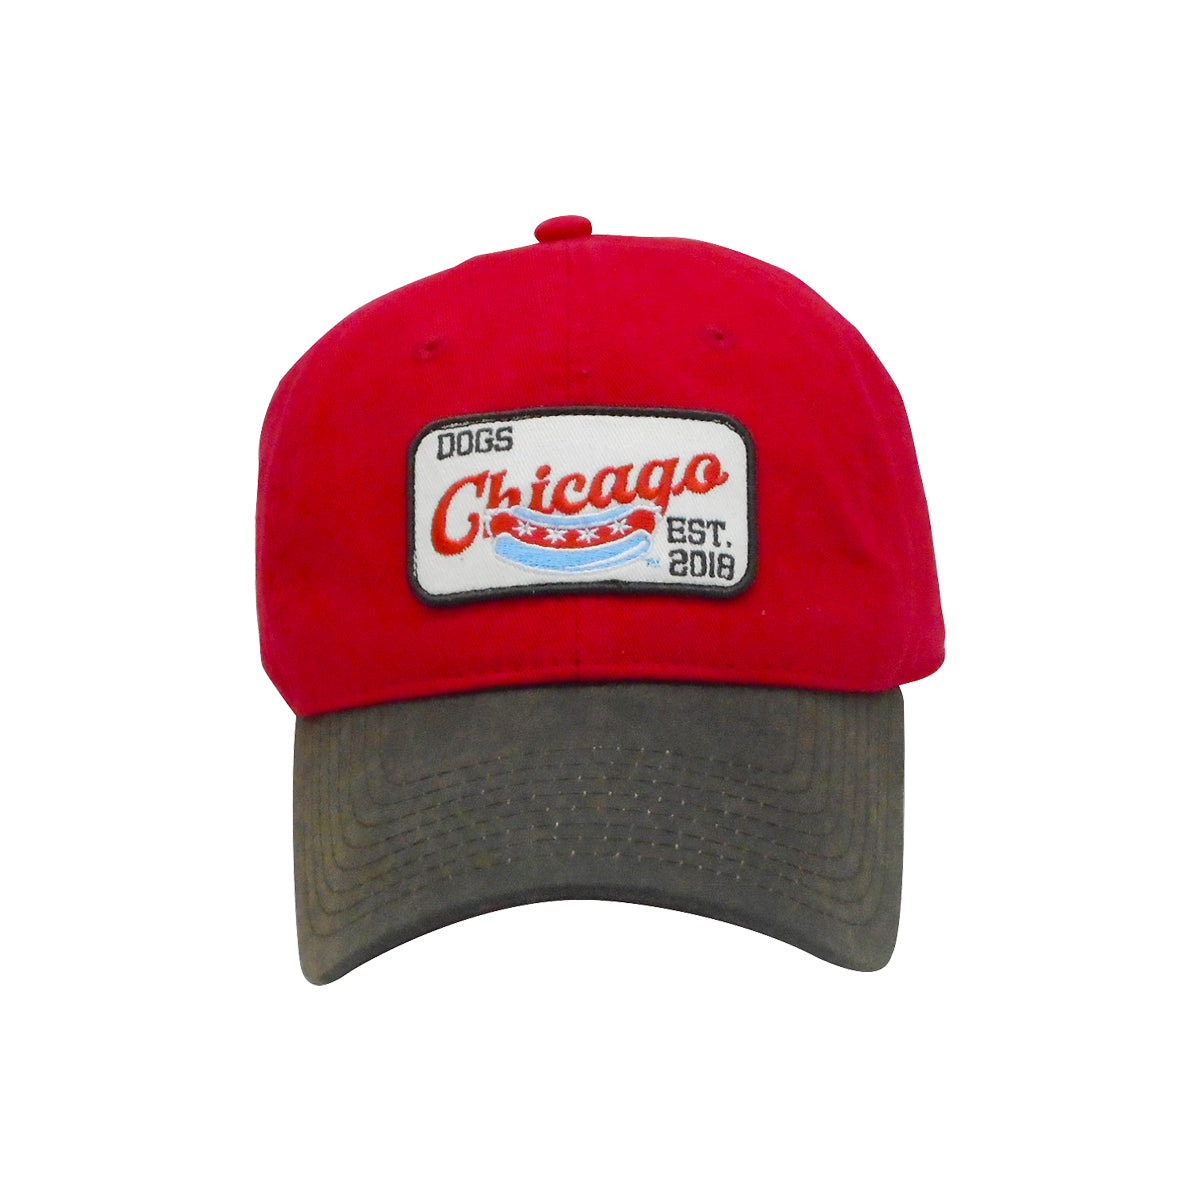 CHICAGO DOGS MEN'S STRUCTURED SCRIPT PATCH ADJUSTABLE HAT - RED